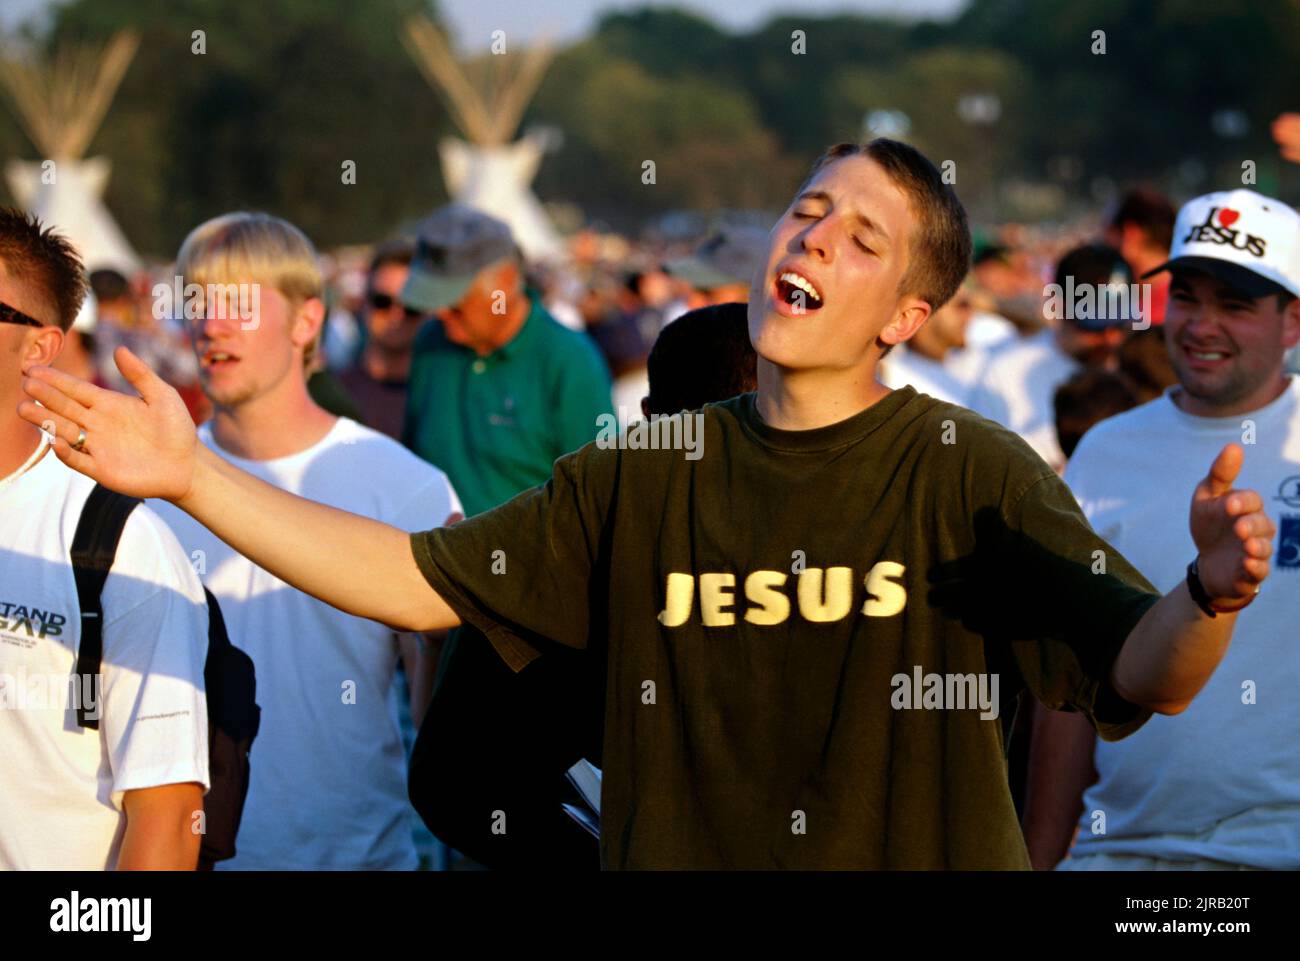 Members of the Promise Keepers, a conservative Christian organization, pray during a sunset service on the National Mall, October 4, 1997 in Washington, DC. An estimated 700,000 men gathered for the 'Stand in the Gap: A Sacred Assembly of Men' prayer event. Stock Photo